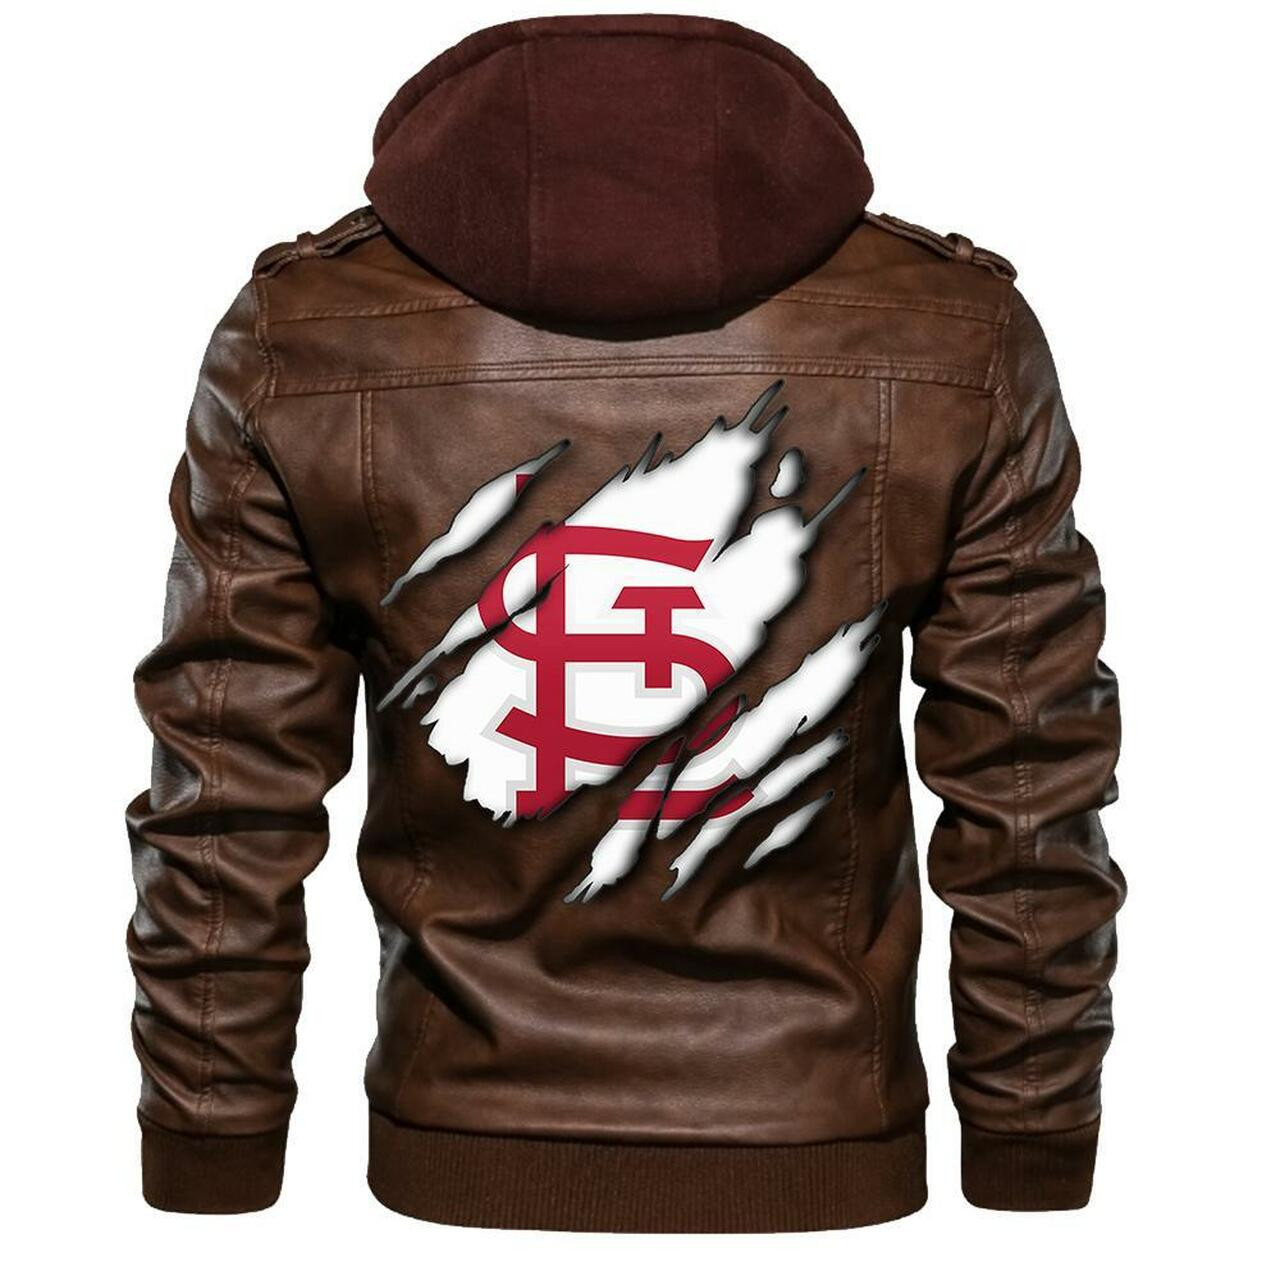 To get a great look, consider purchasing This New Leather Jacket 212